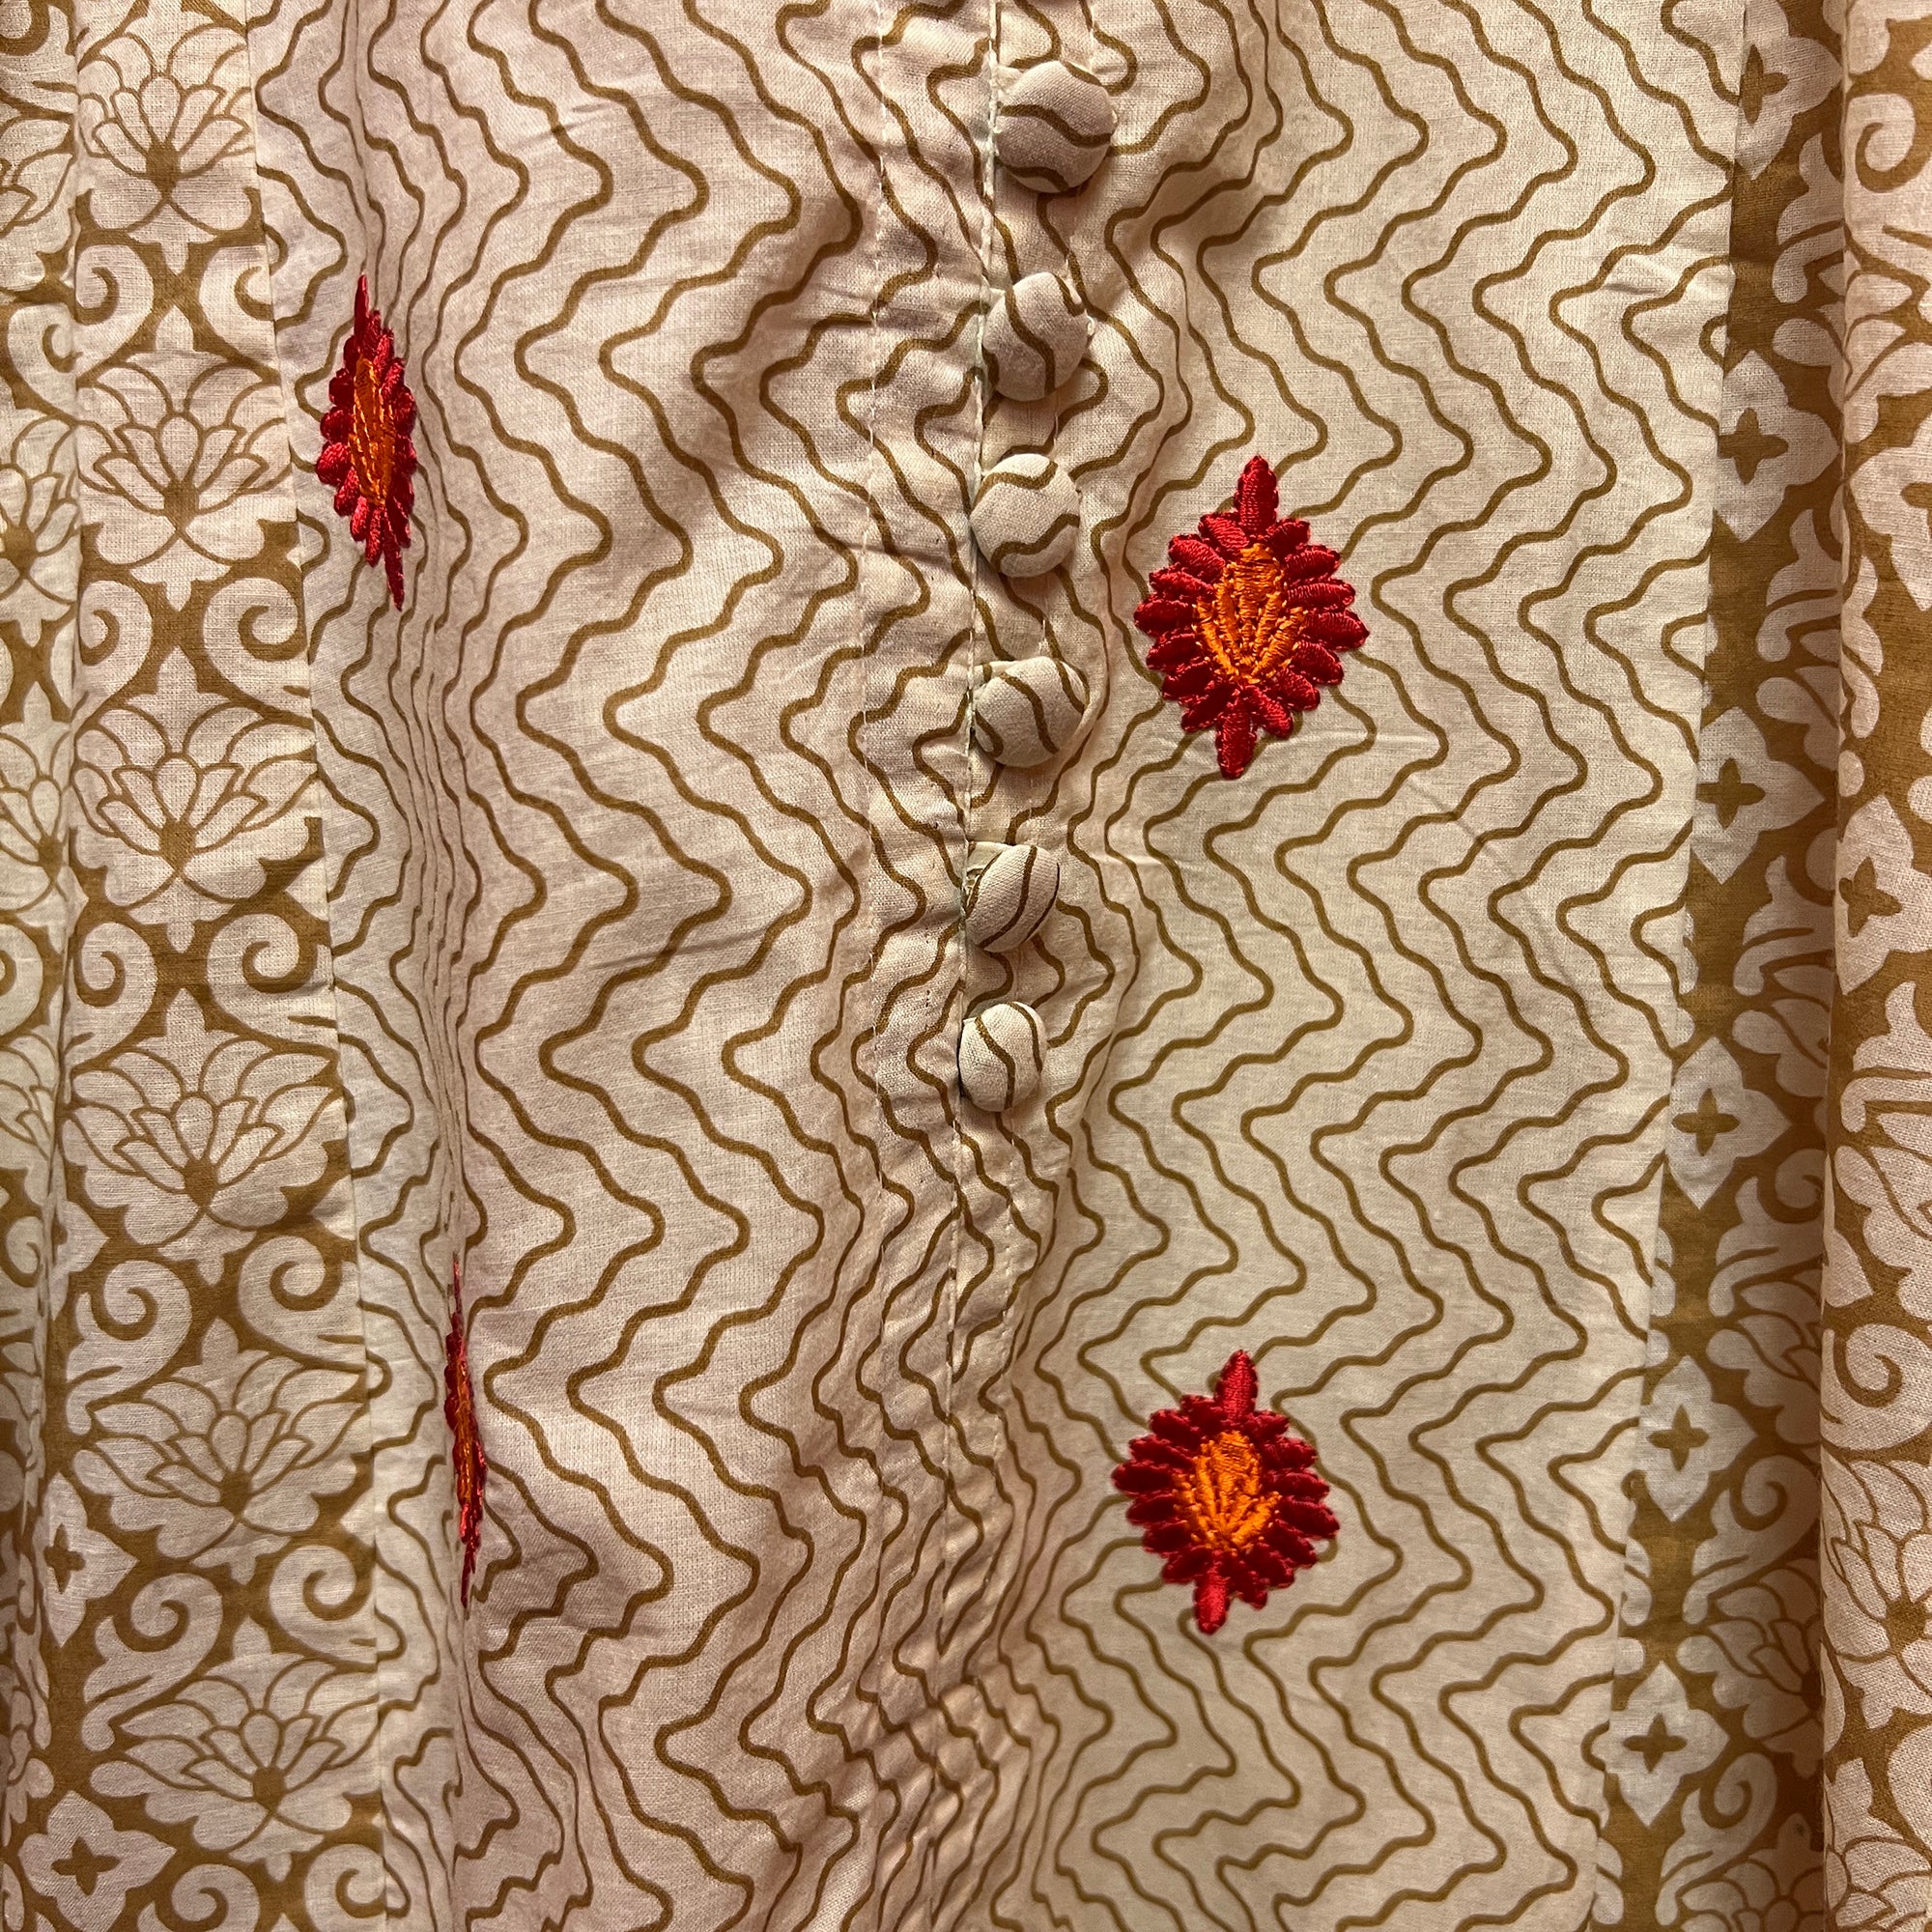 Tan and Cream Lond kurta with Embroidery - Vintage India NYC